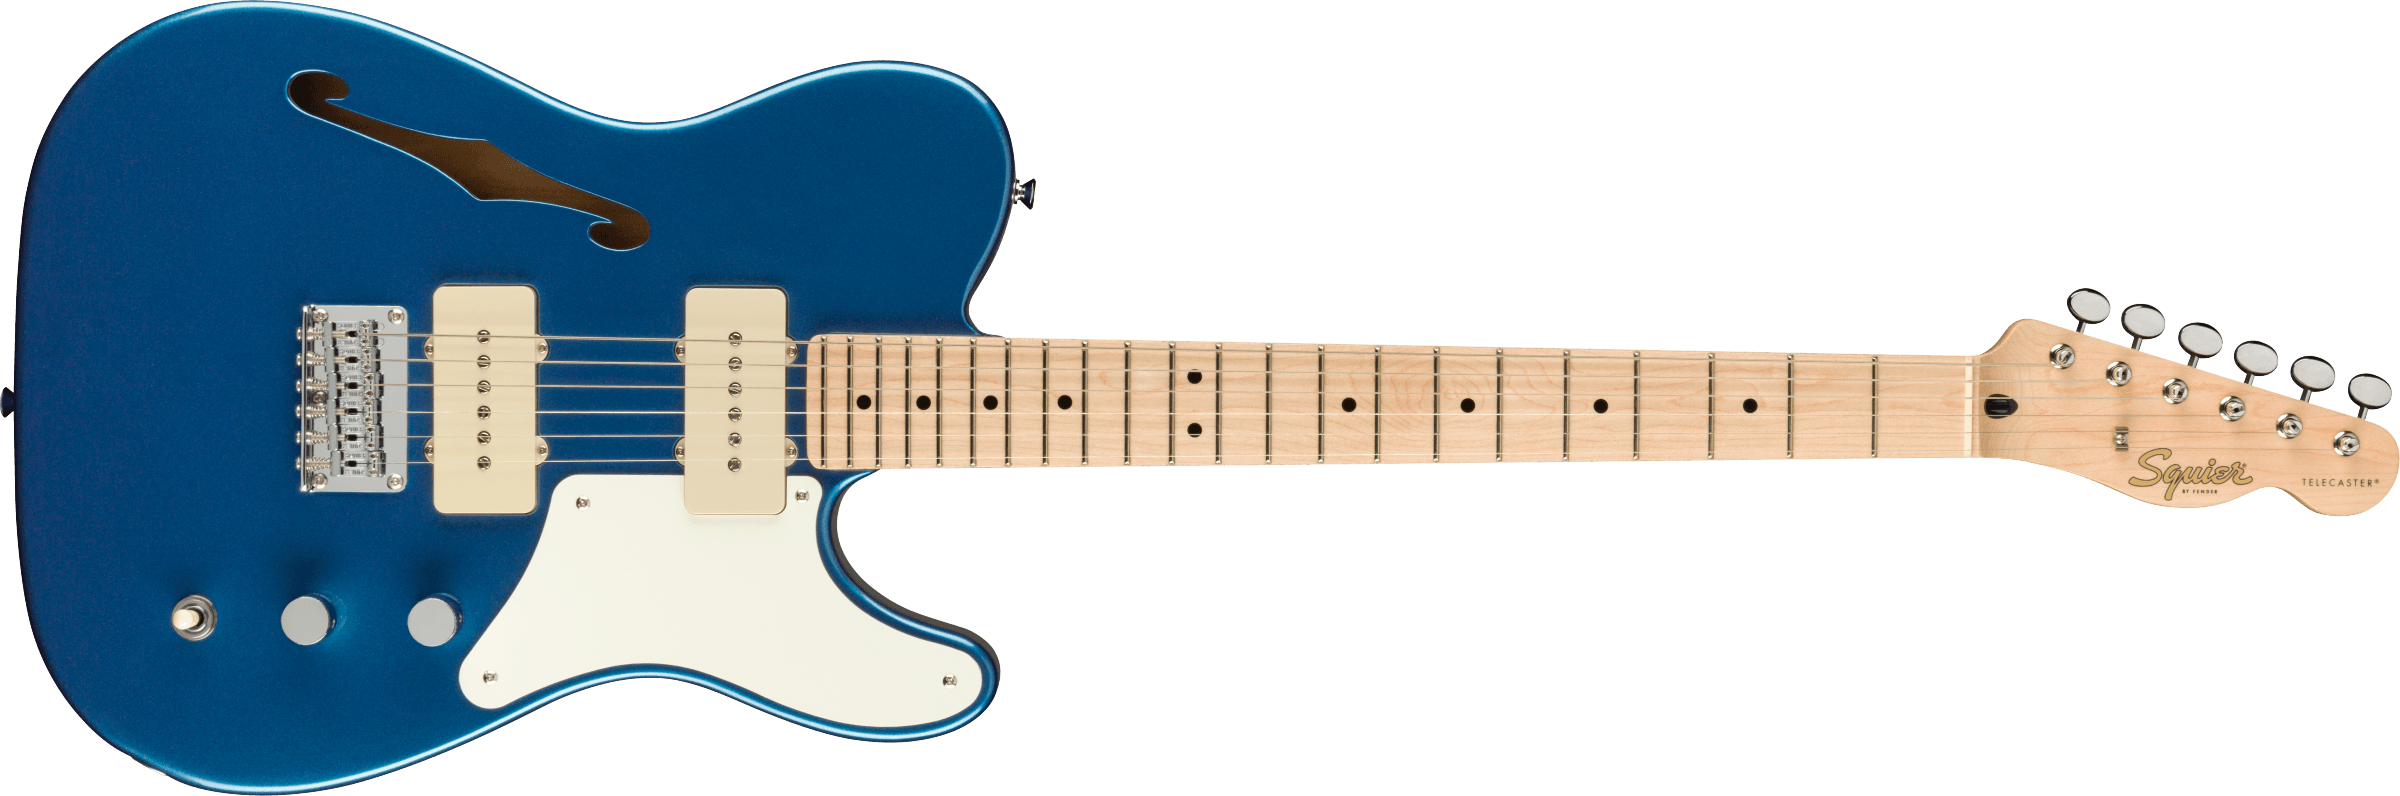 Squier Paranormal Cabronita Telecaster Thinline Maple Fingerboard Parchment Pickguard, Lake Placid Blue F-0377020502